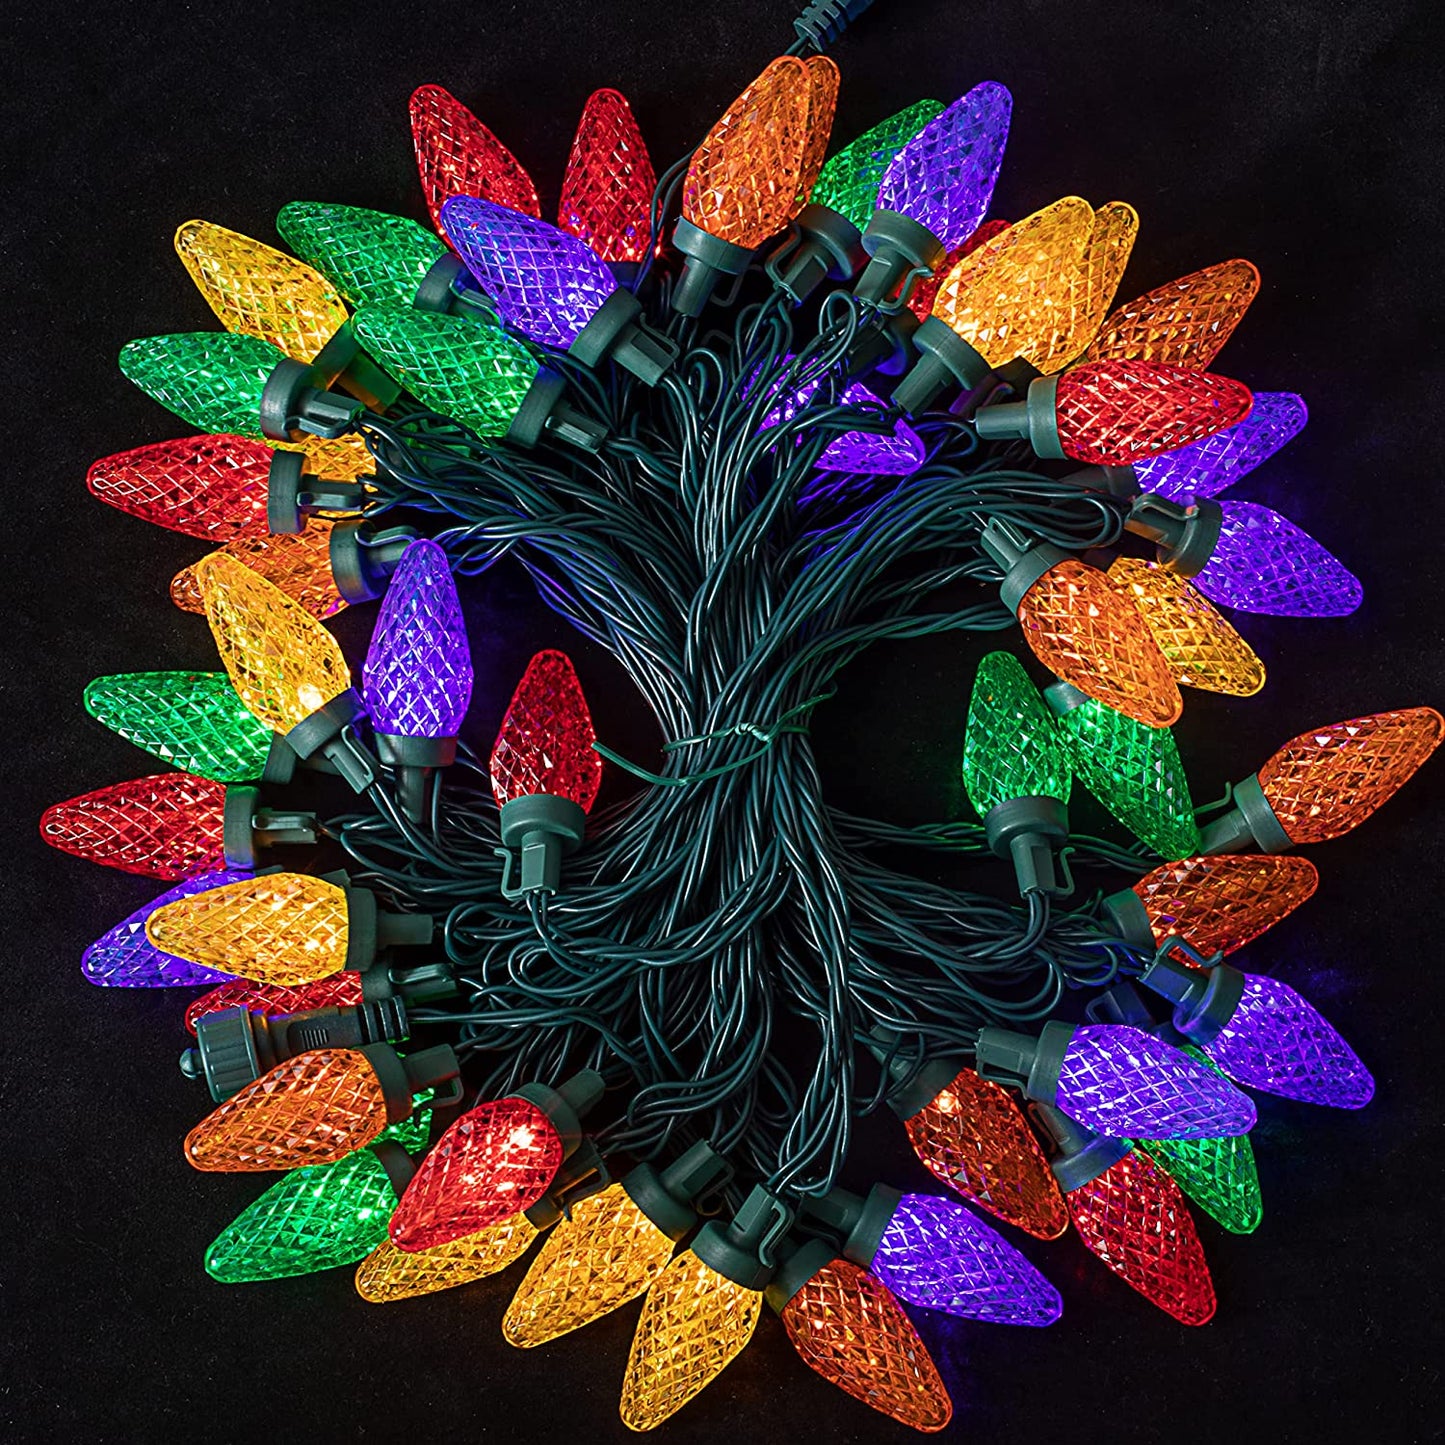 50 Count Christmas Multicolor LED String Lights